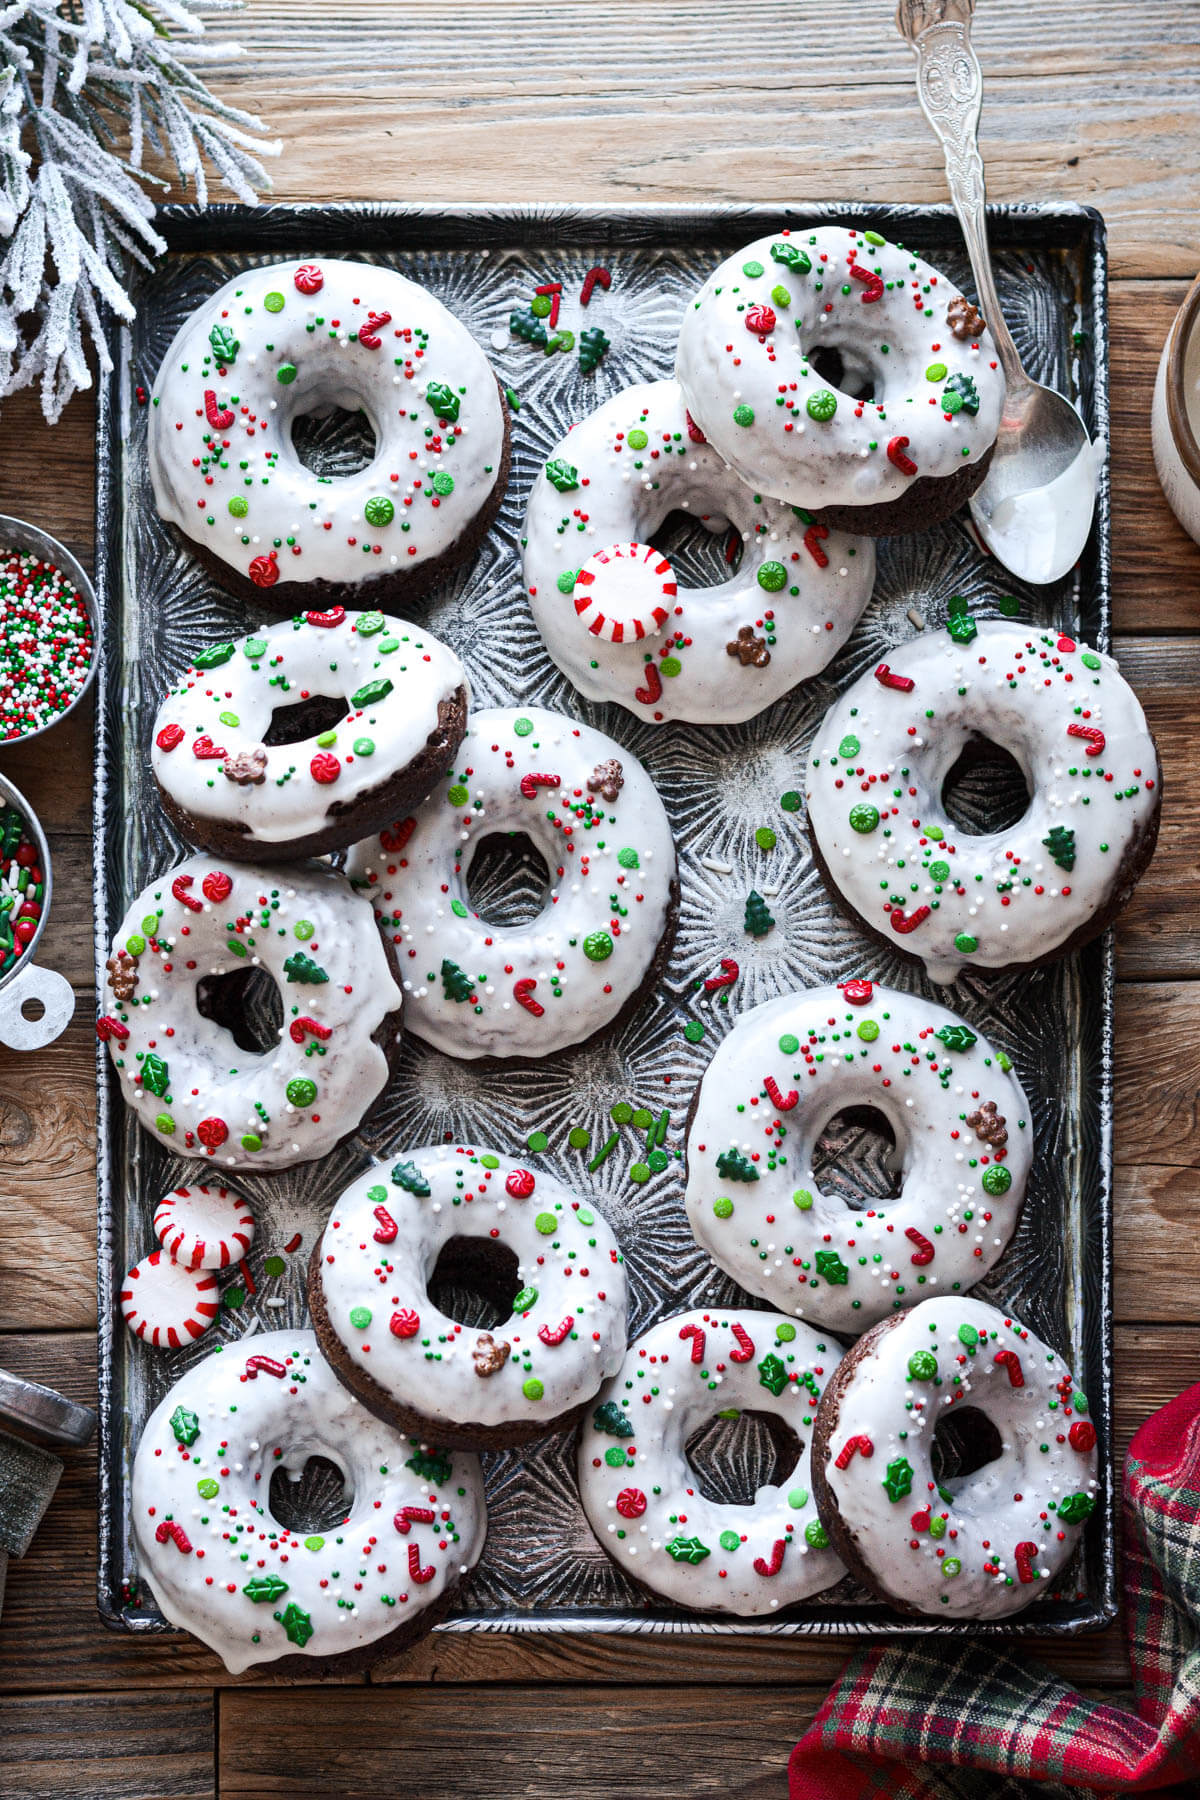 Chocolate peppermint donuts with Christmas sprinkles on a vintage baking sheet.